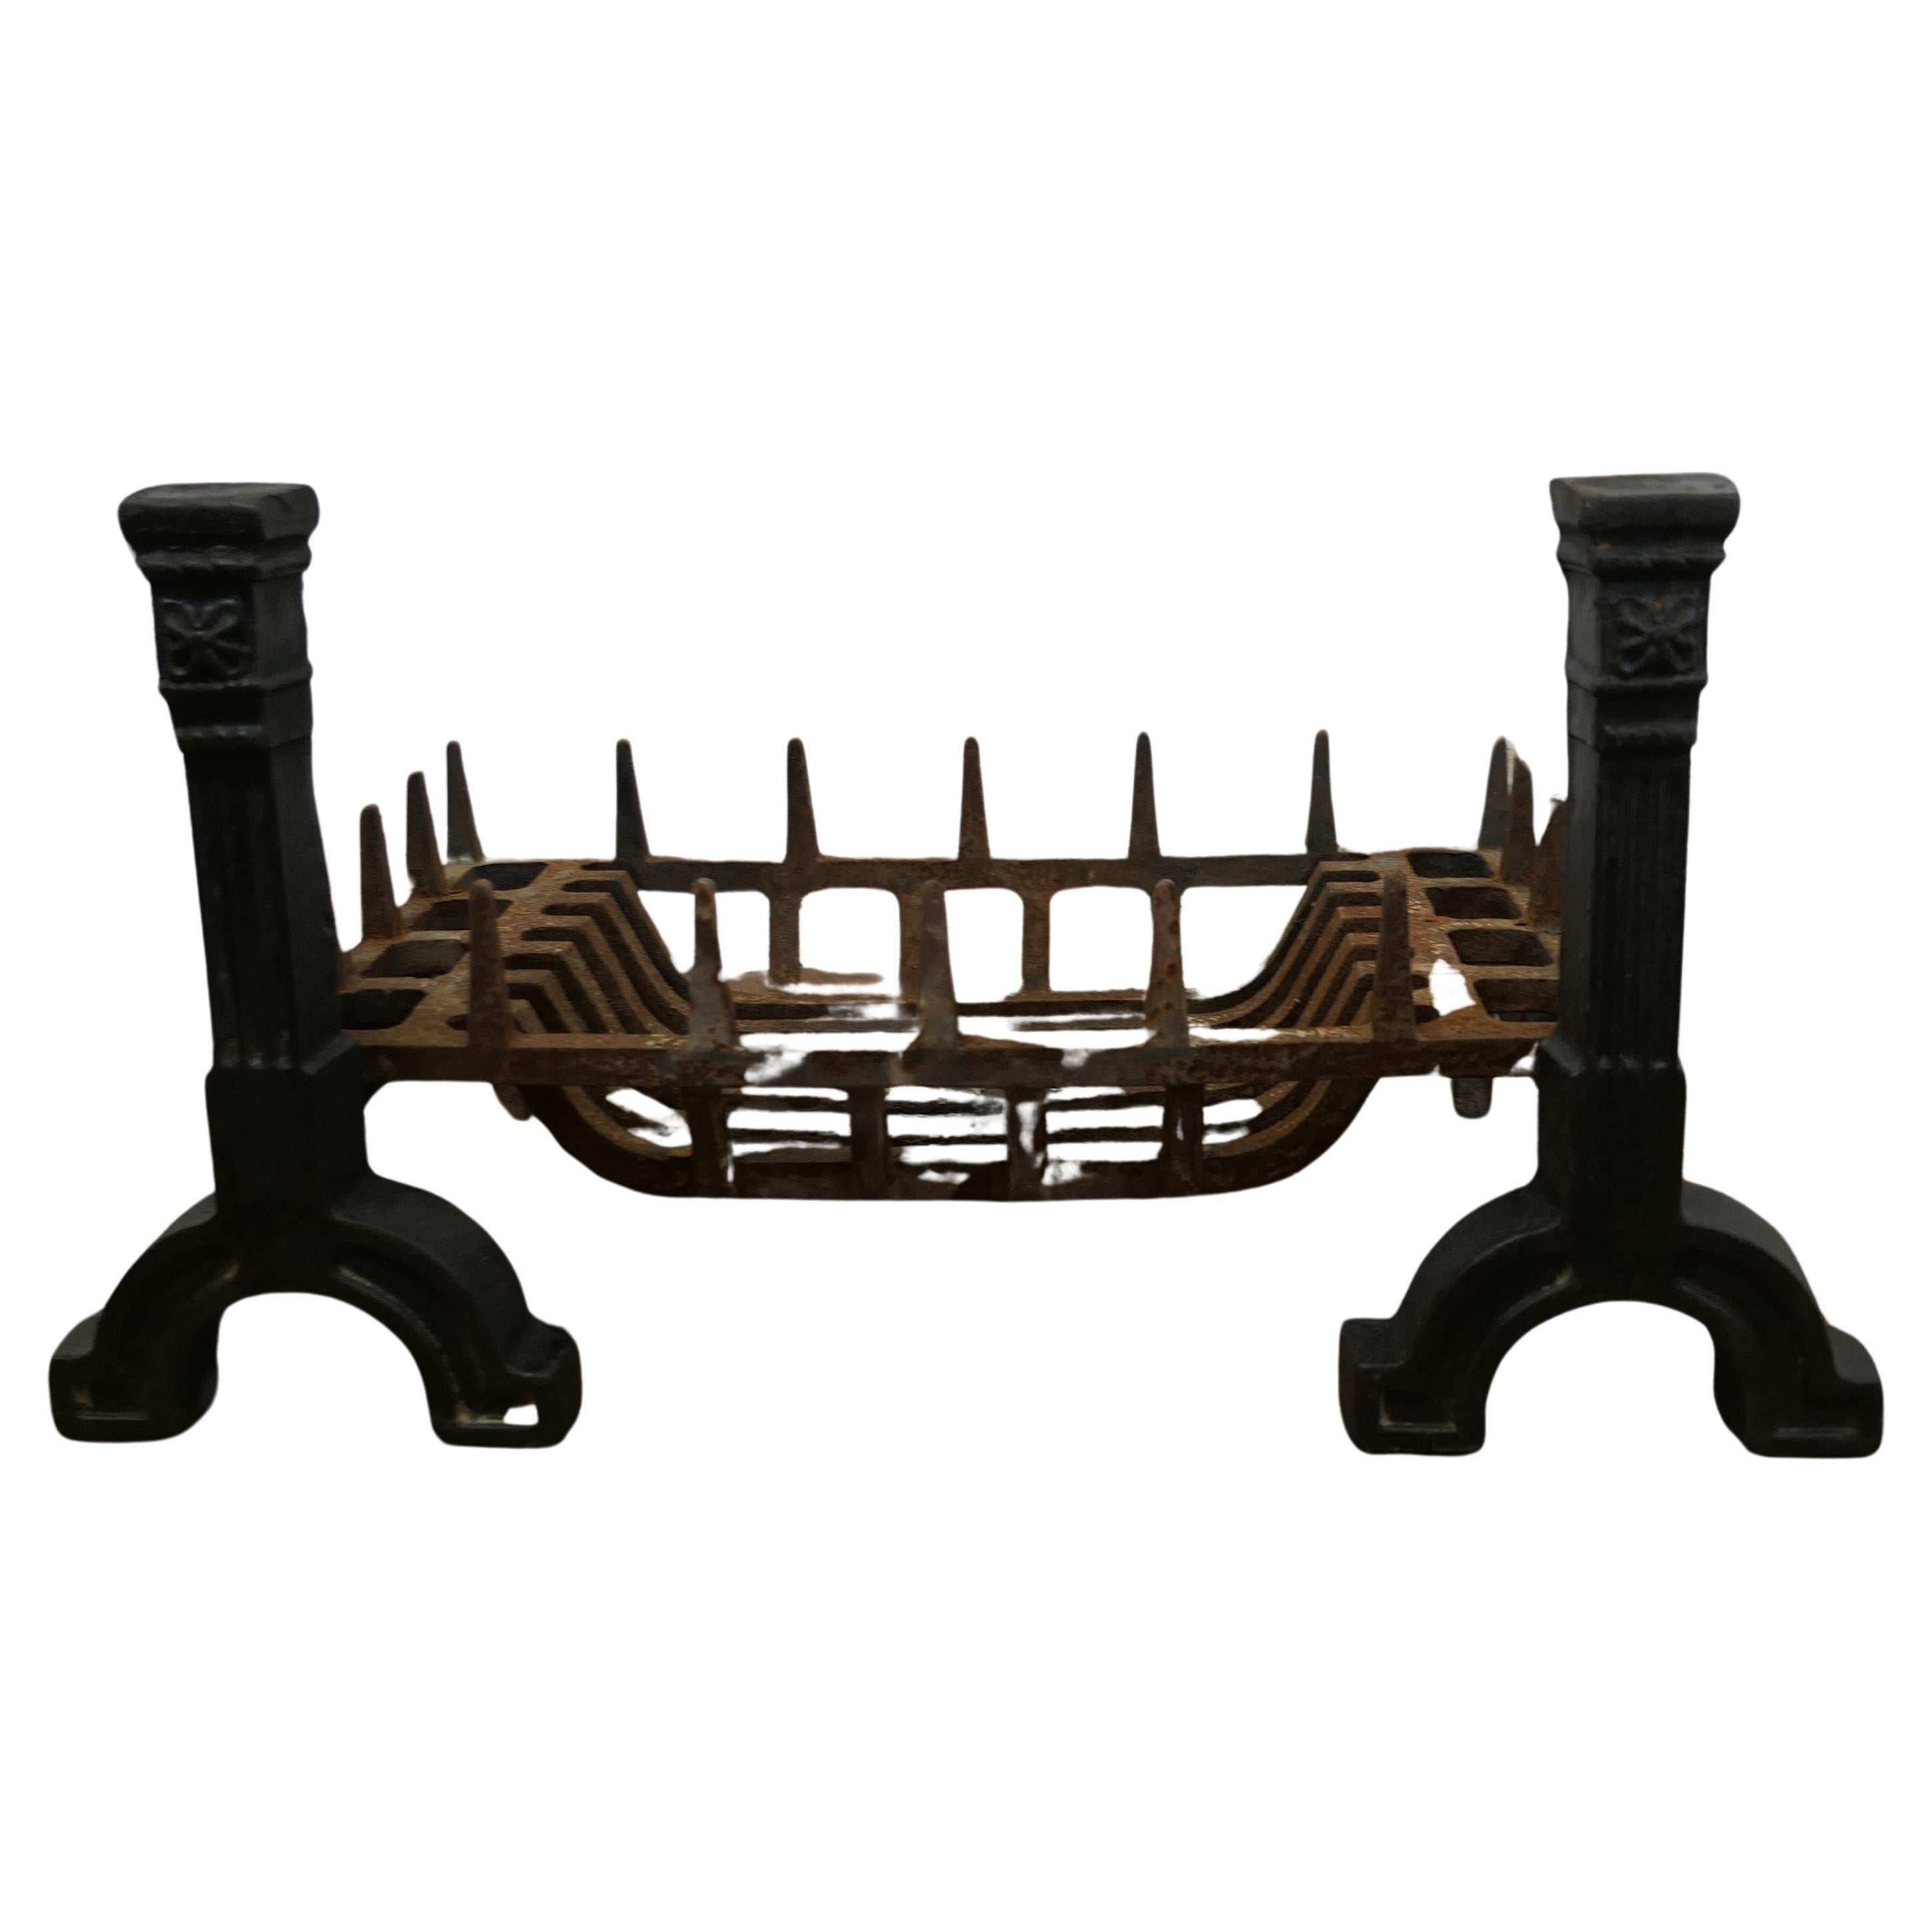 Large 19th Century Inglenook Fire Grate on Andirons For Sale